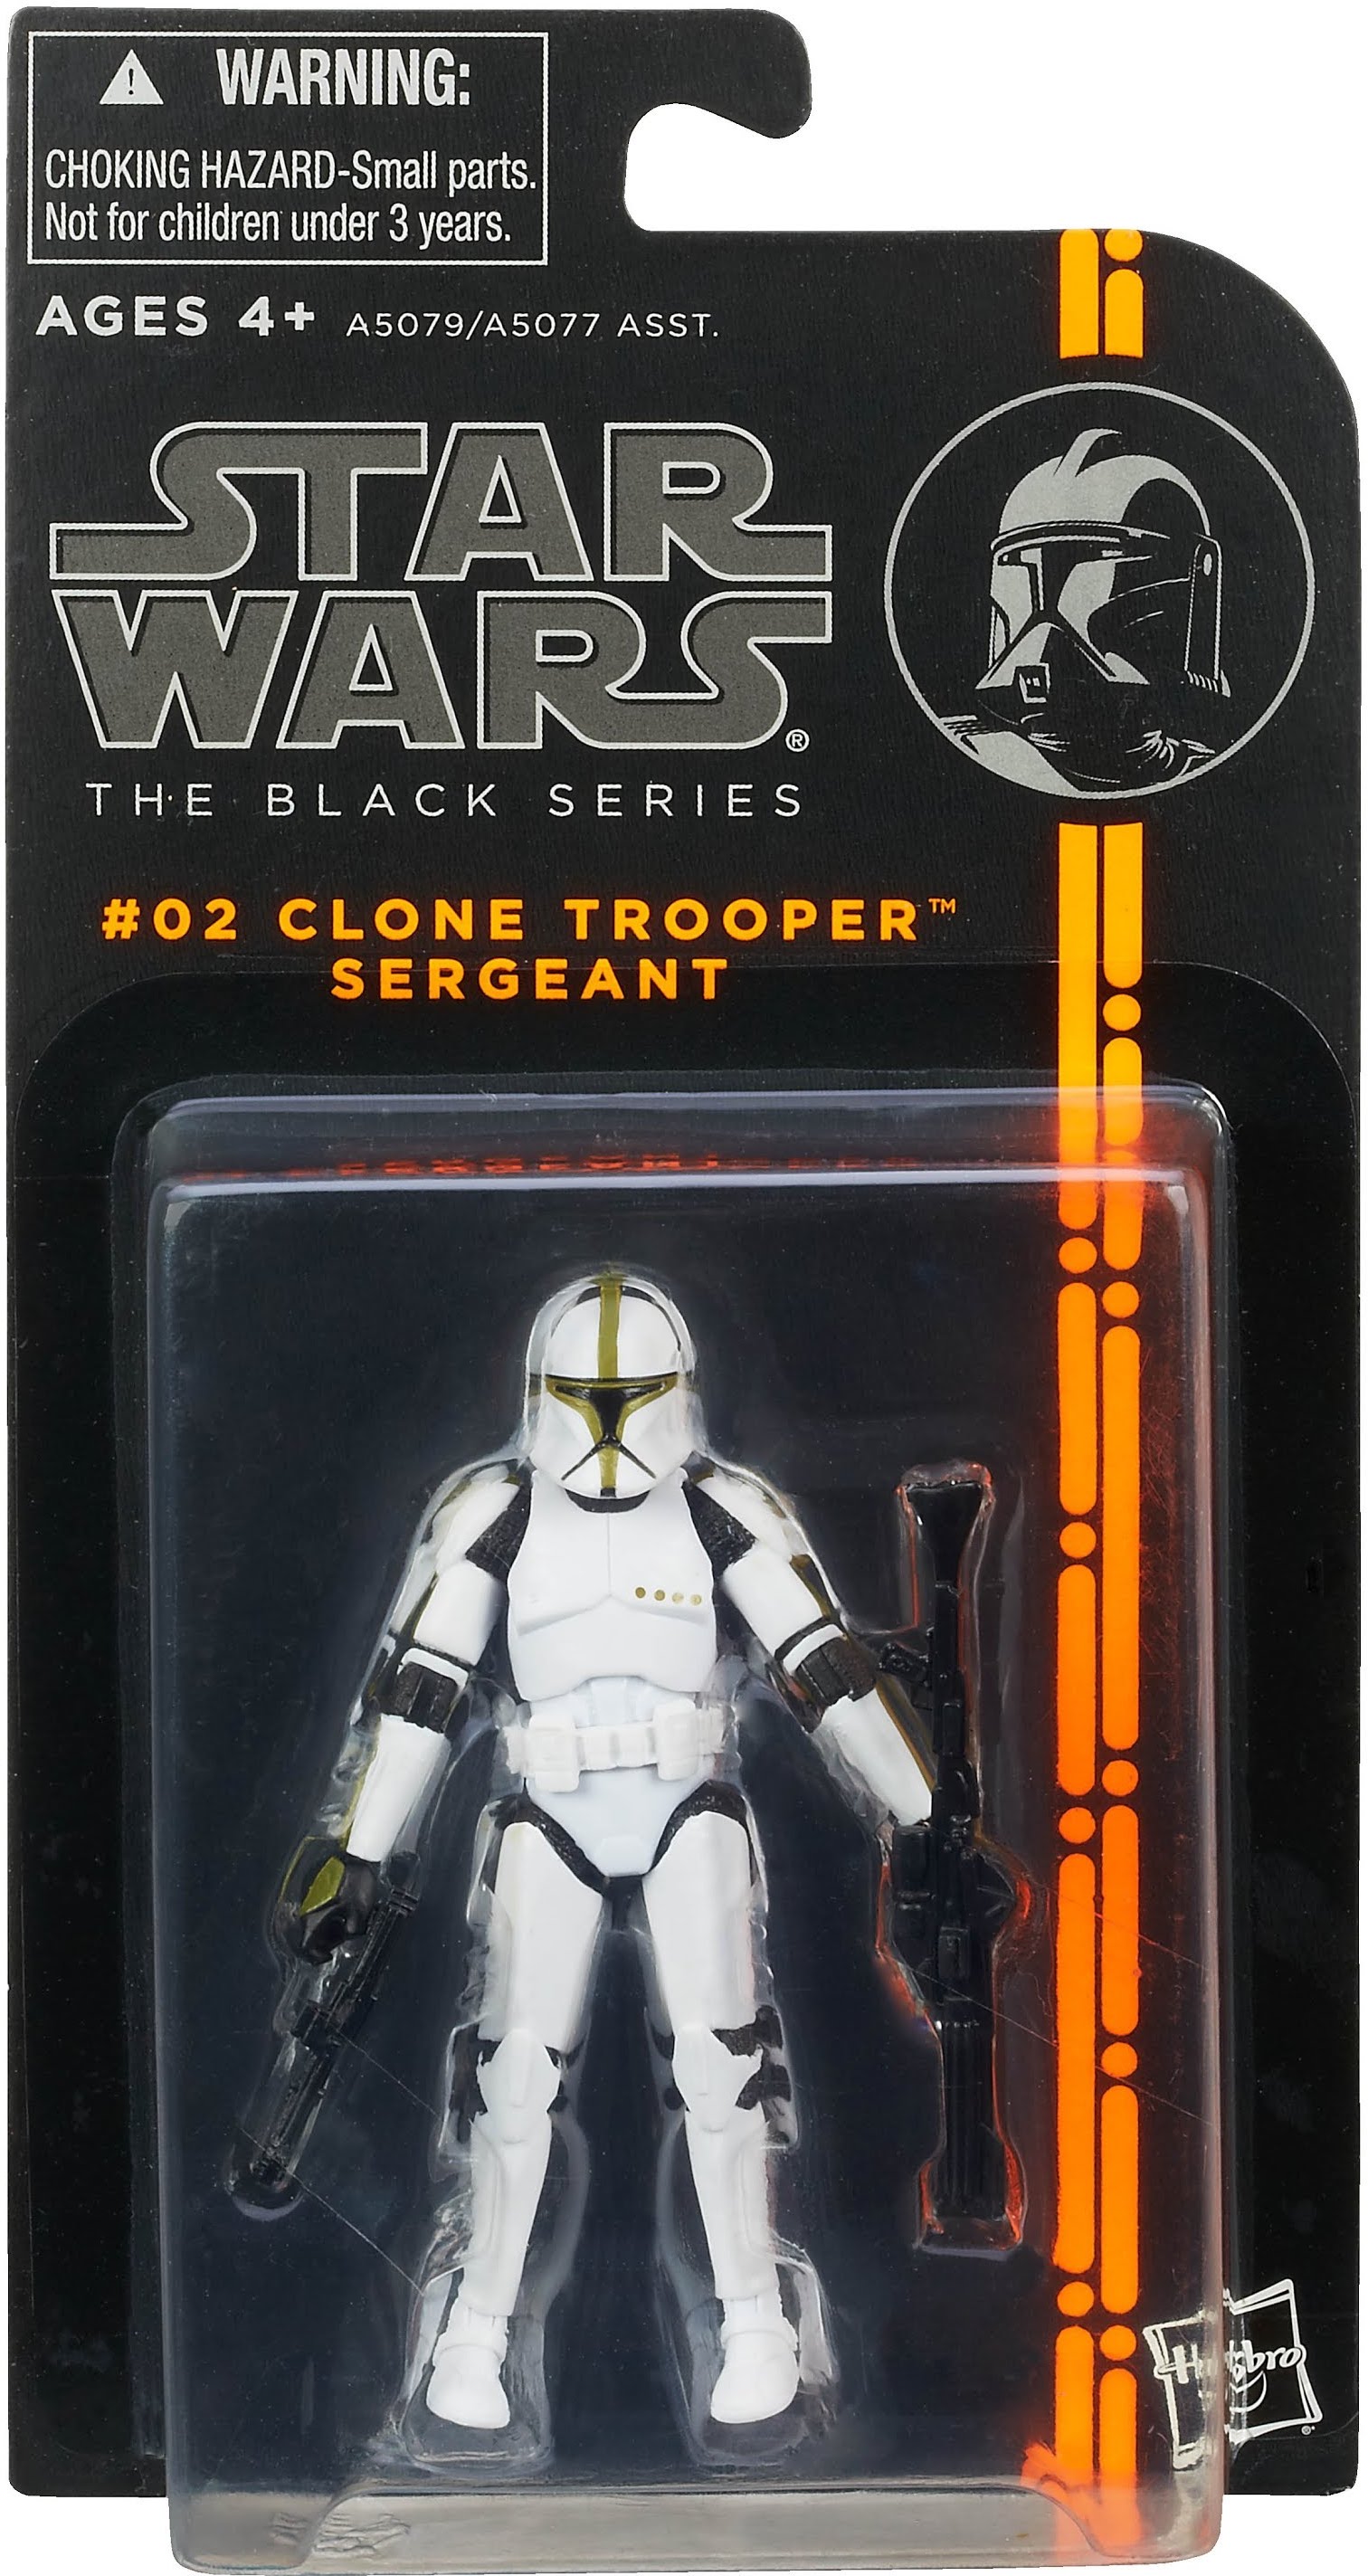 #07 Clone Trooper Sergeant Hasbro Limited Star Wars The Black Series Limited 